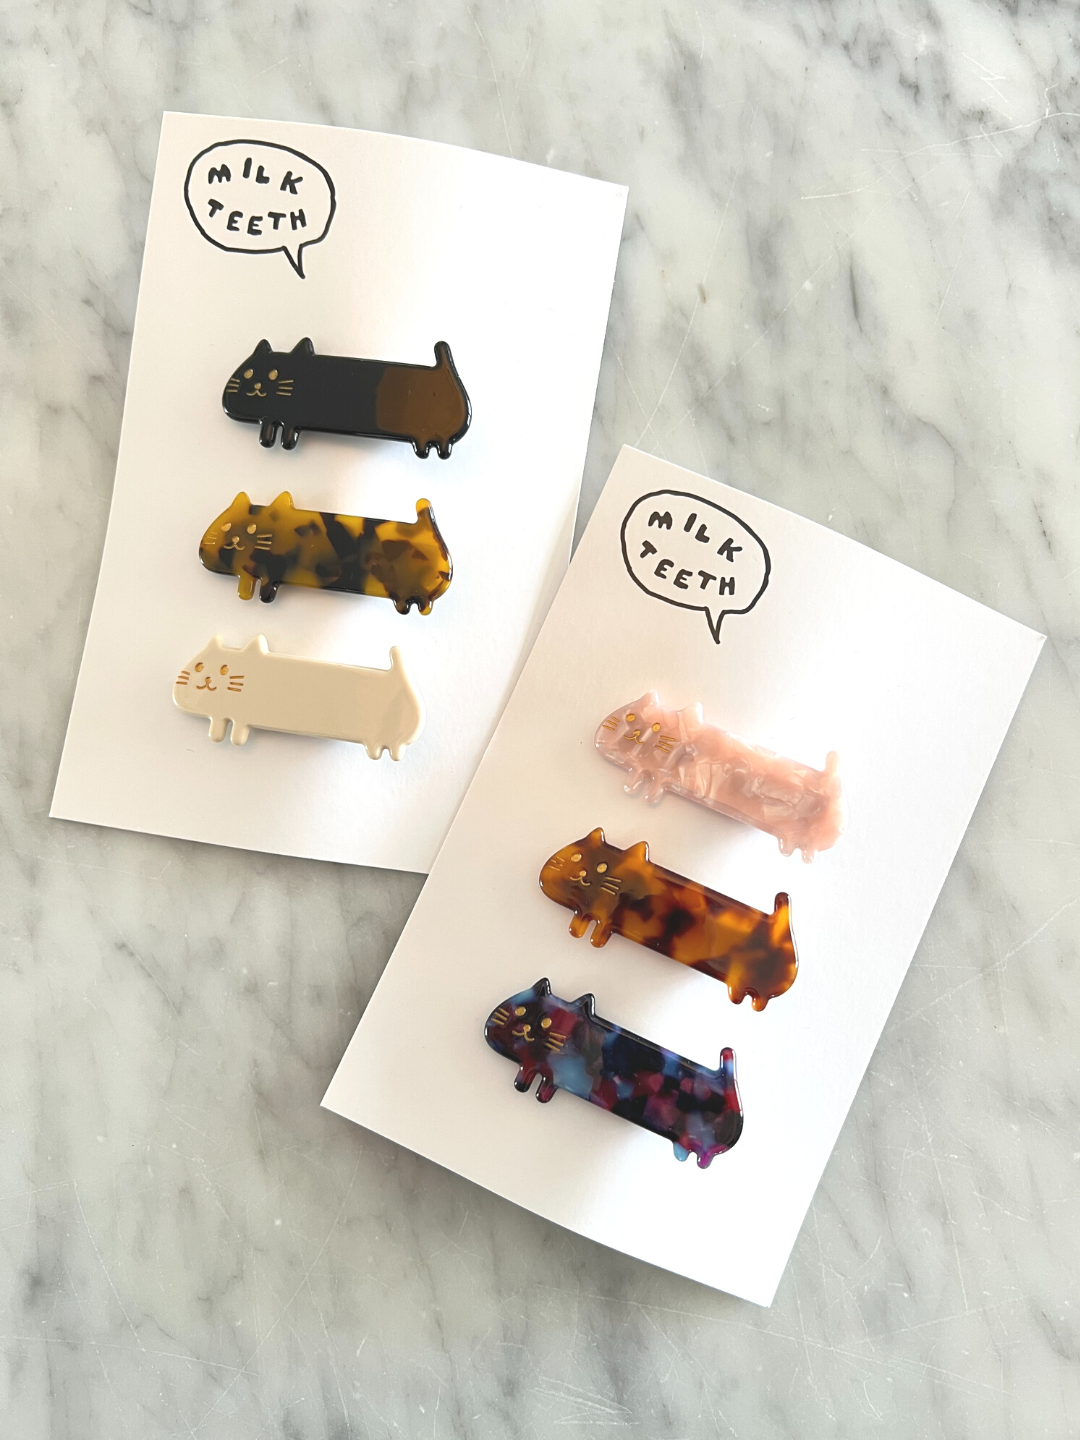 Two Milk Teeth presentation cards, each with three kids' barrettes in the shape of elongated cats; one set of black, tortoiseshell and white; one set of pink, ginger and purple